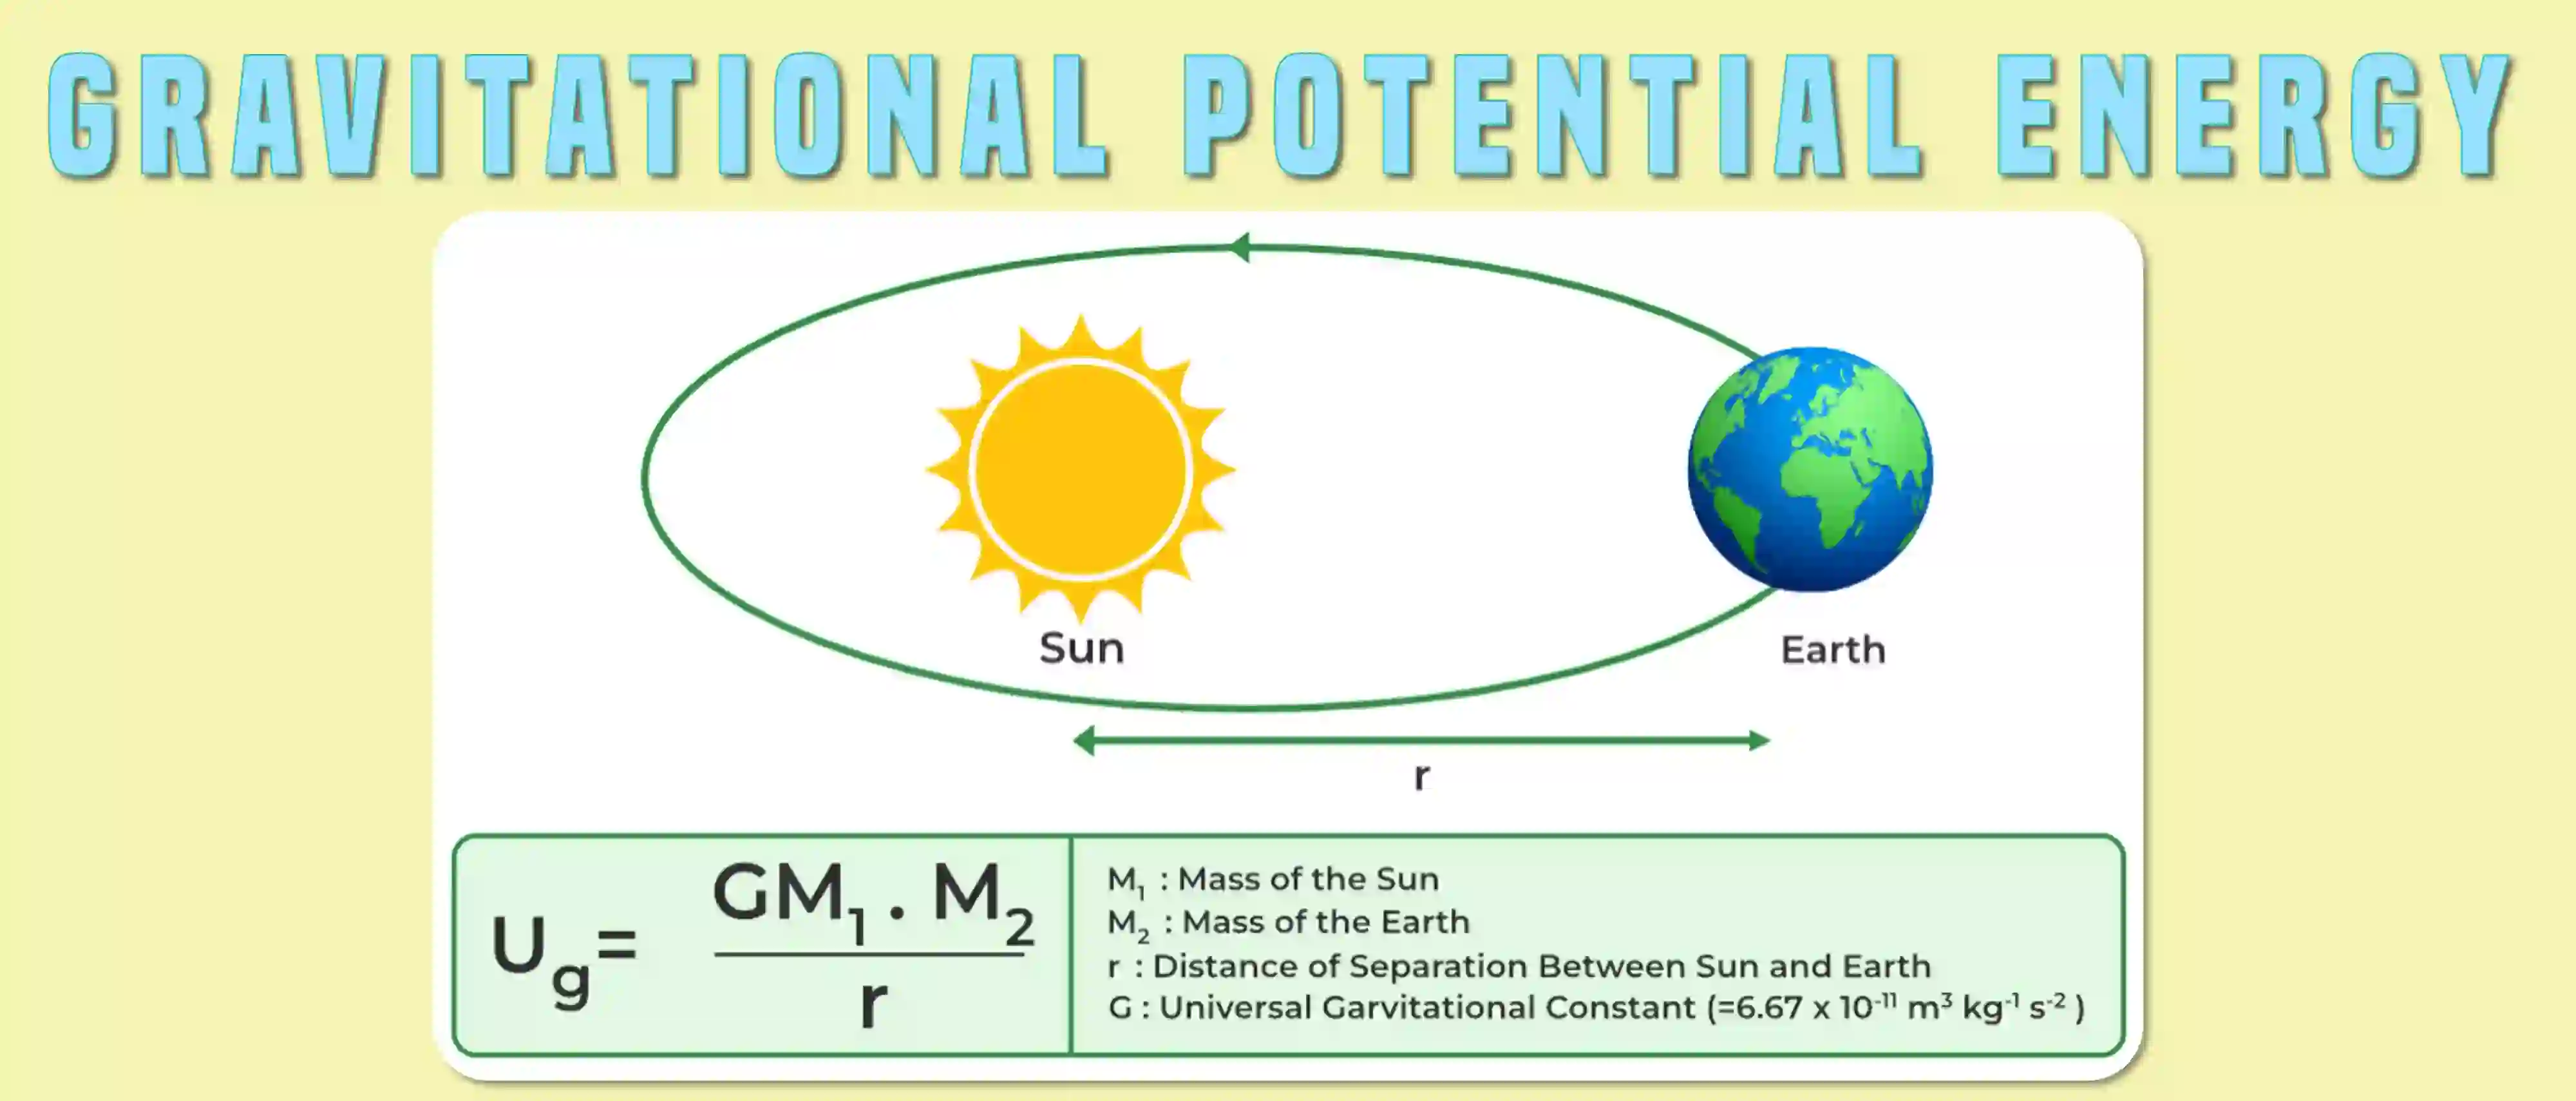 Gravitational potential energy refers to the energy an object possesses due to its position in a gravitational field.